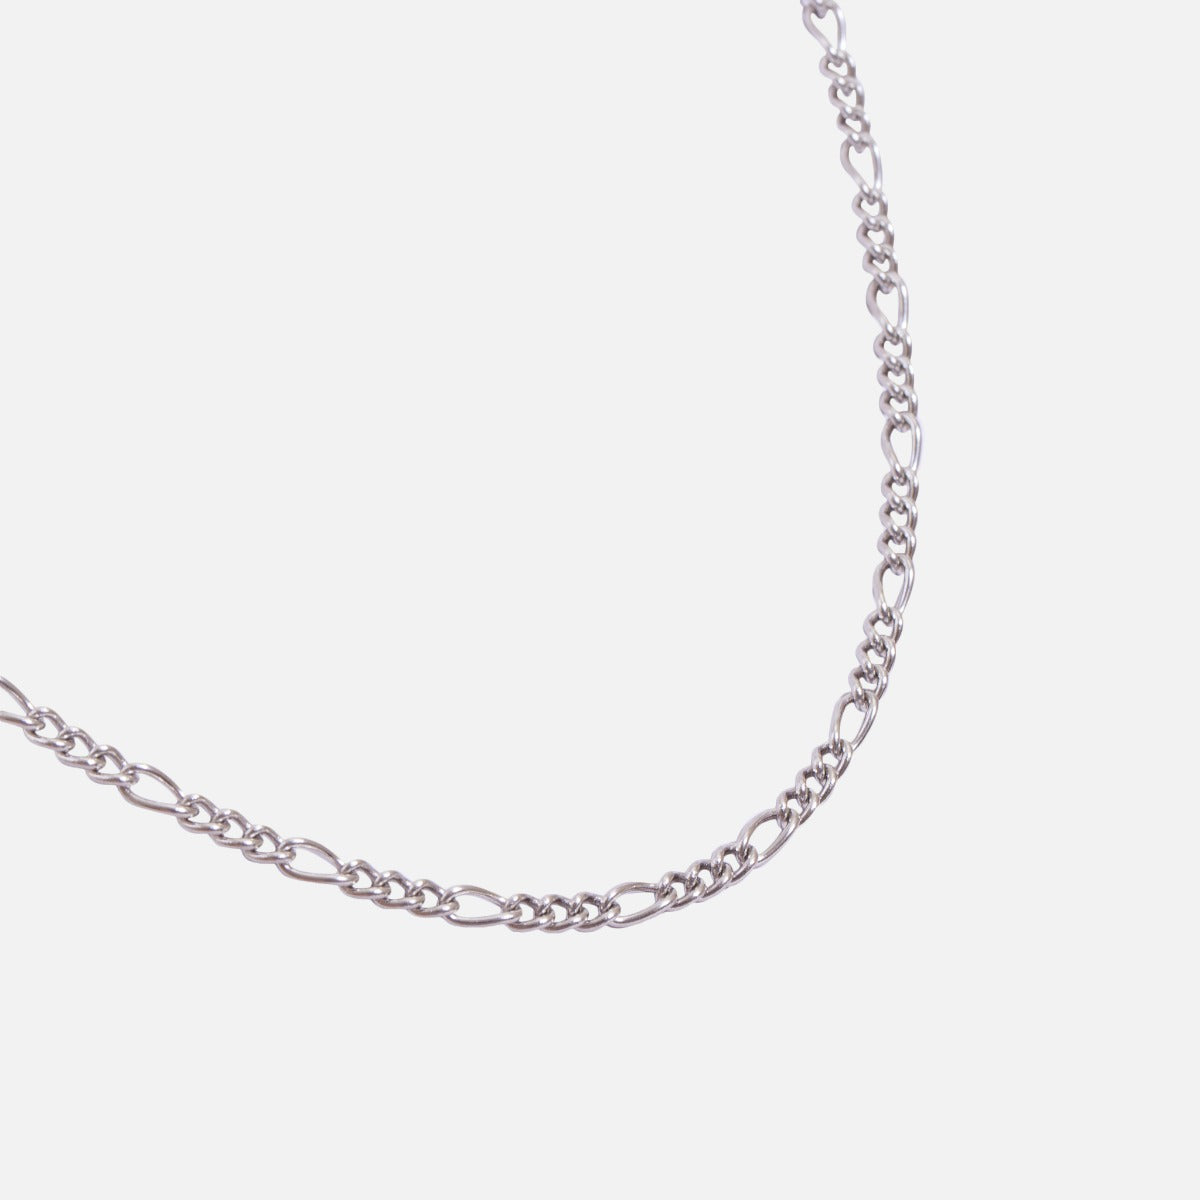 Minimalist necklace in stainless steel and its figaro mesh